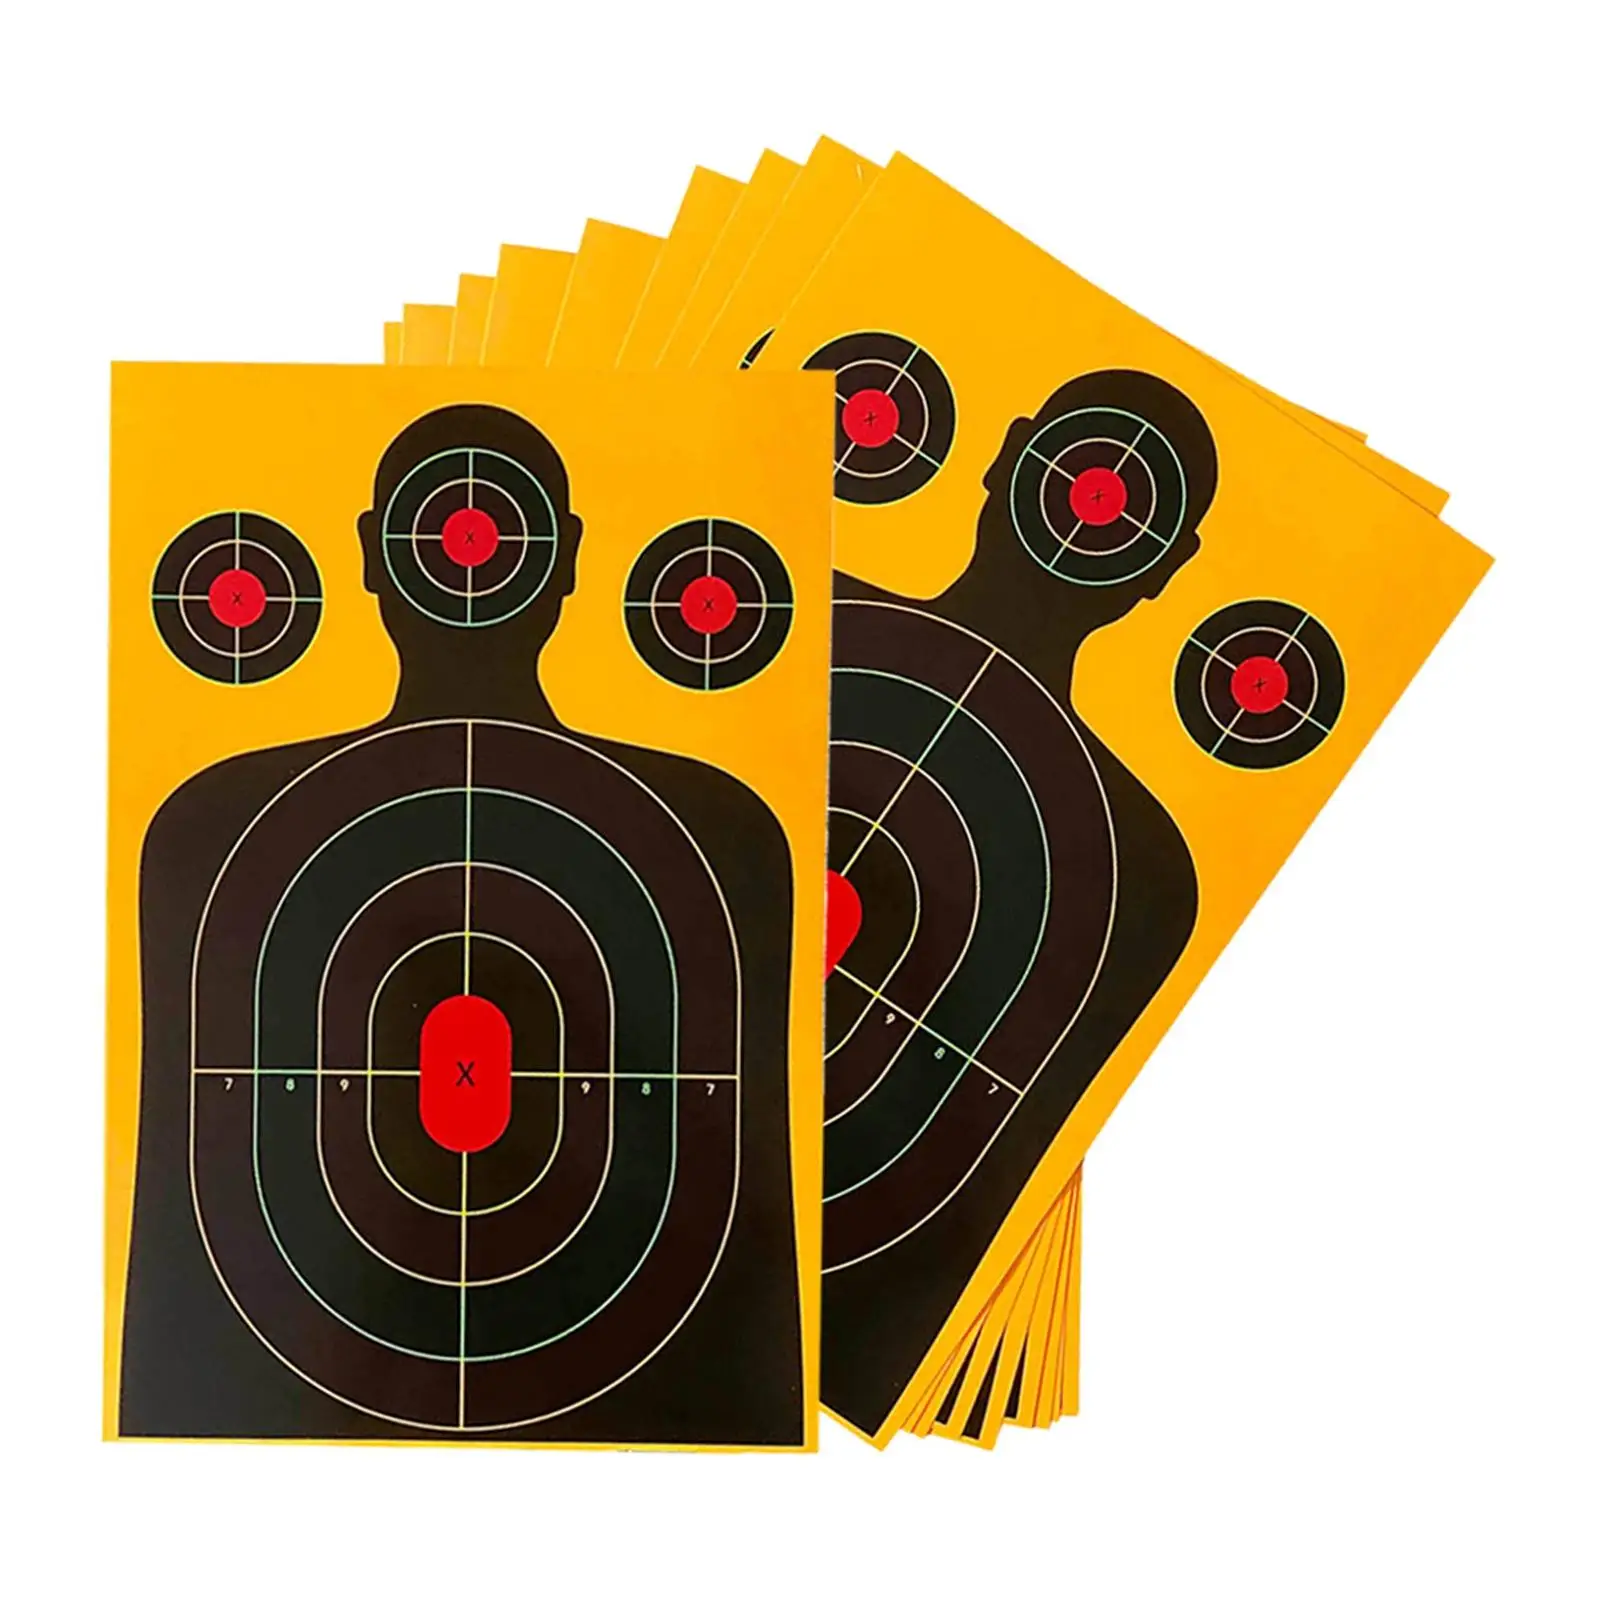 10Pcs Silhouette Target Training Target Catapults Hunting Practice Sport Outdoor Activities without Stand Target Target Paper